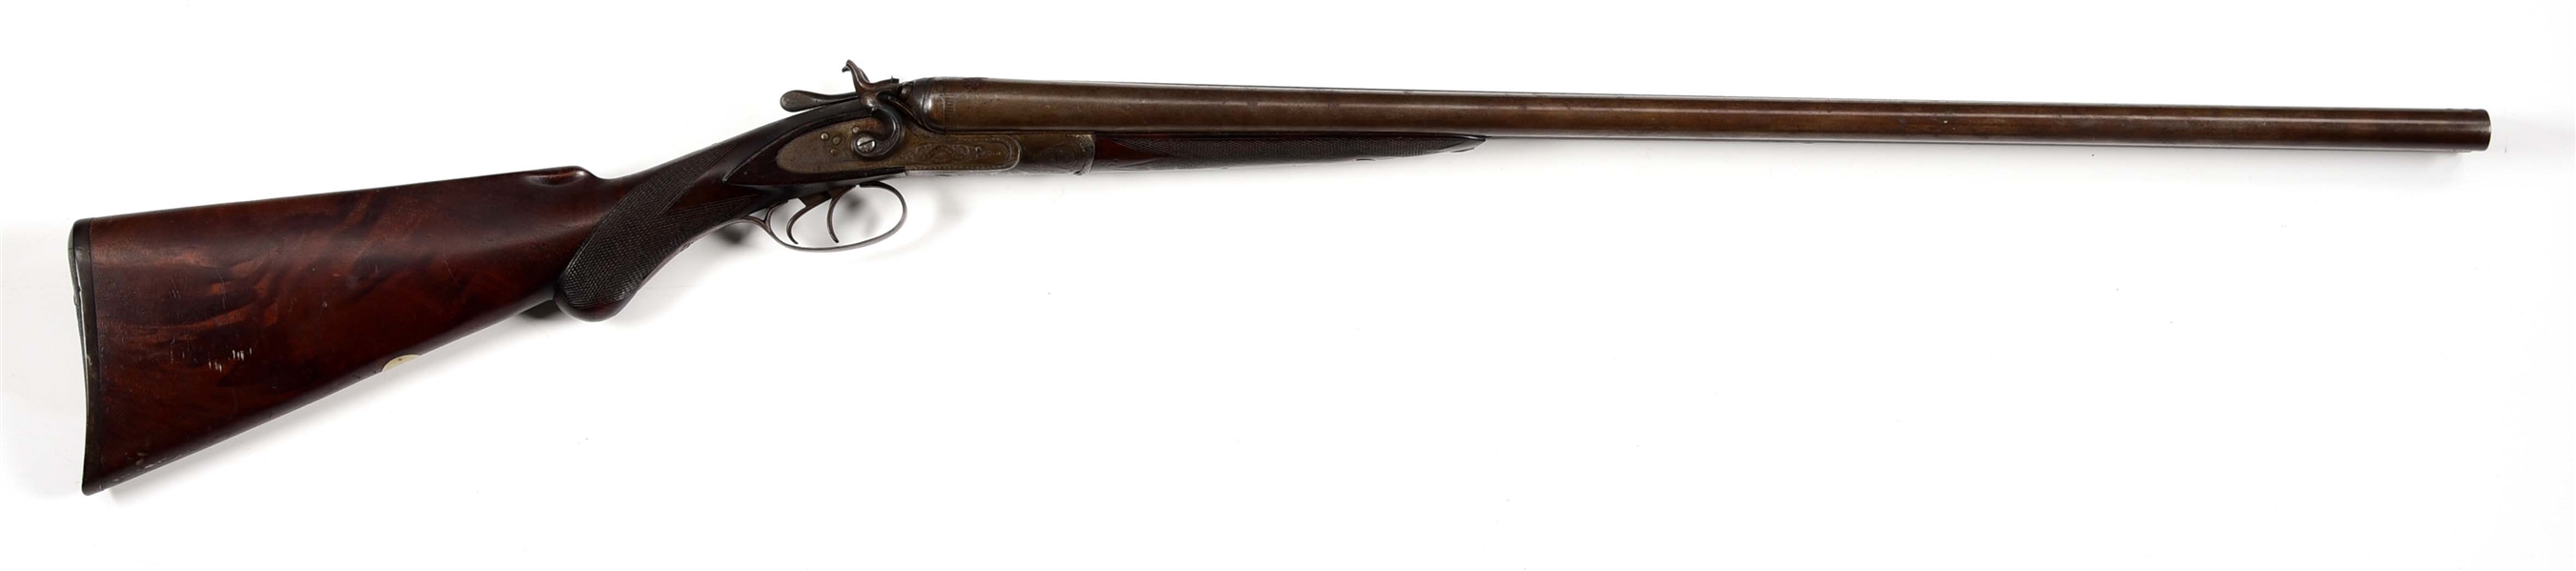 (A) J.P. CLABROUGH & BROS. HAMMER FIRED SIDE BY SIDE SHOTGUN, SERIAL NUMBER 18.